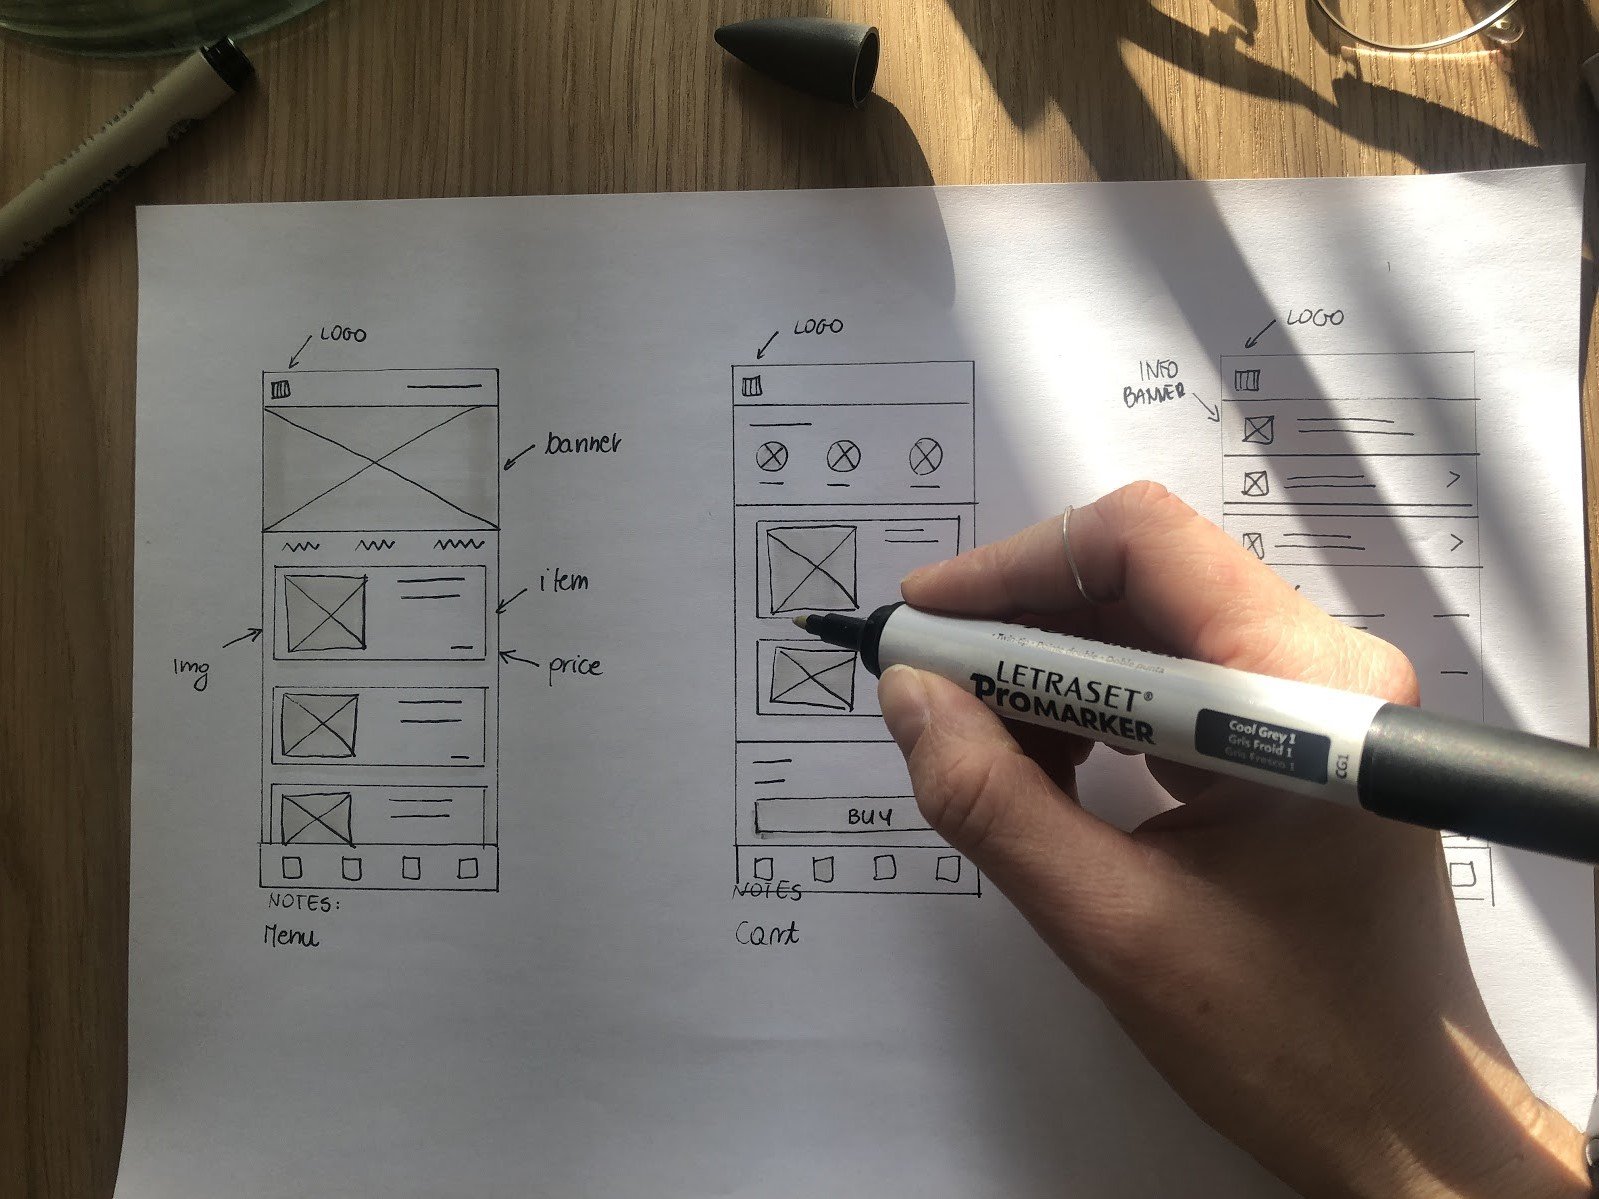 Example of the paper wireframes